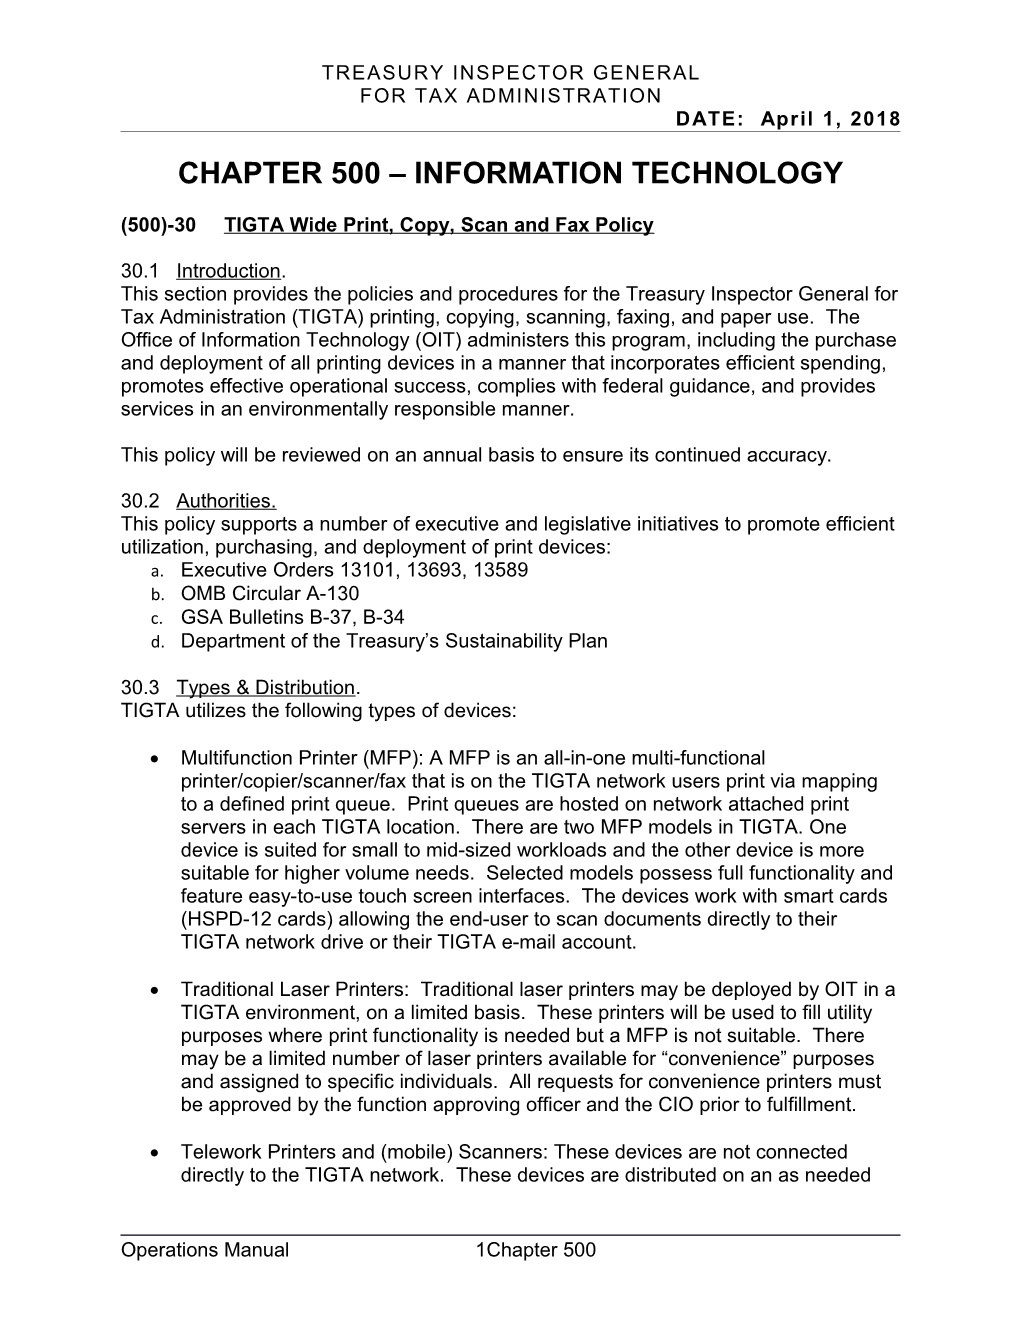 (500)-30 TIGTA Wide Print, Copy, Scan and Fax Policy